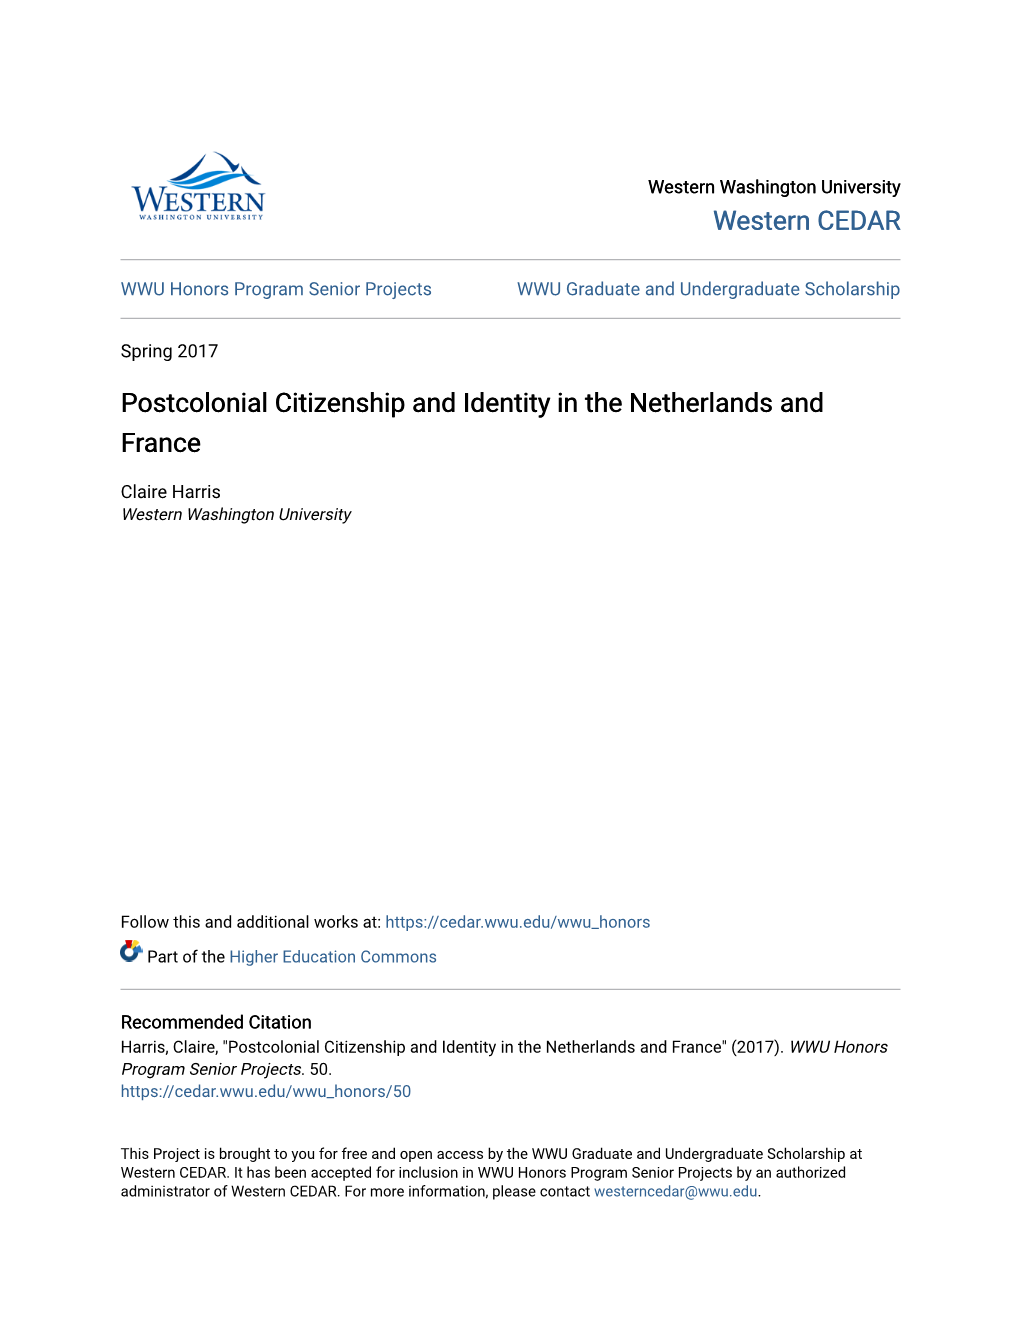 Postcolonial Citizenship and Identity in the Netherlands and France